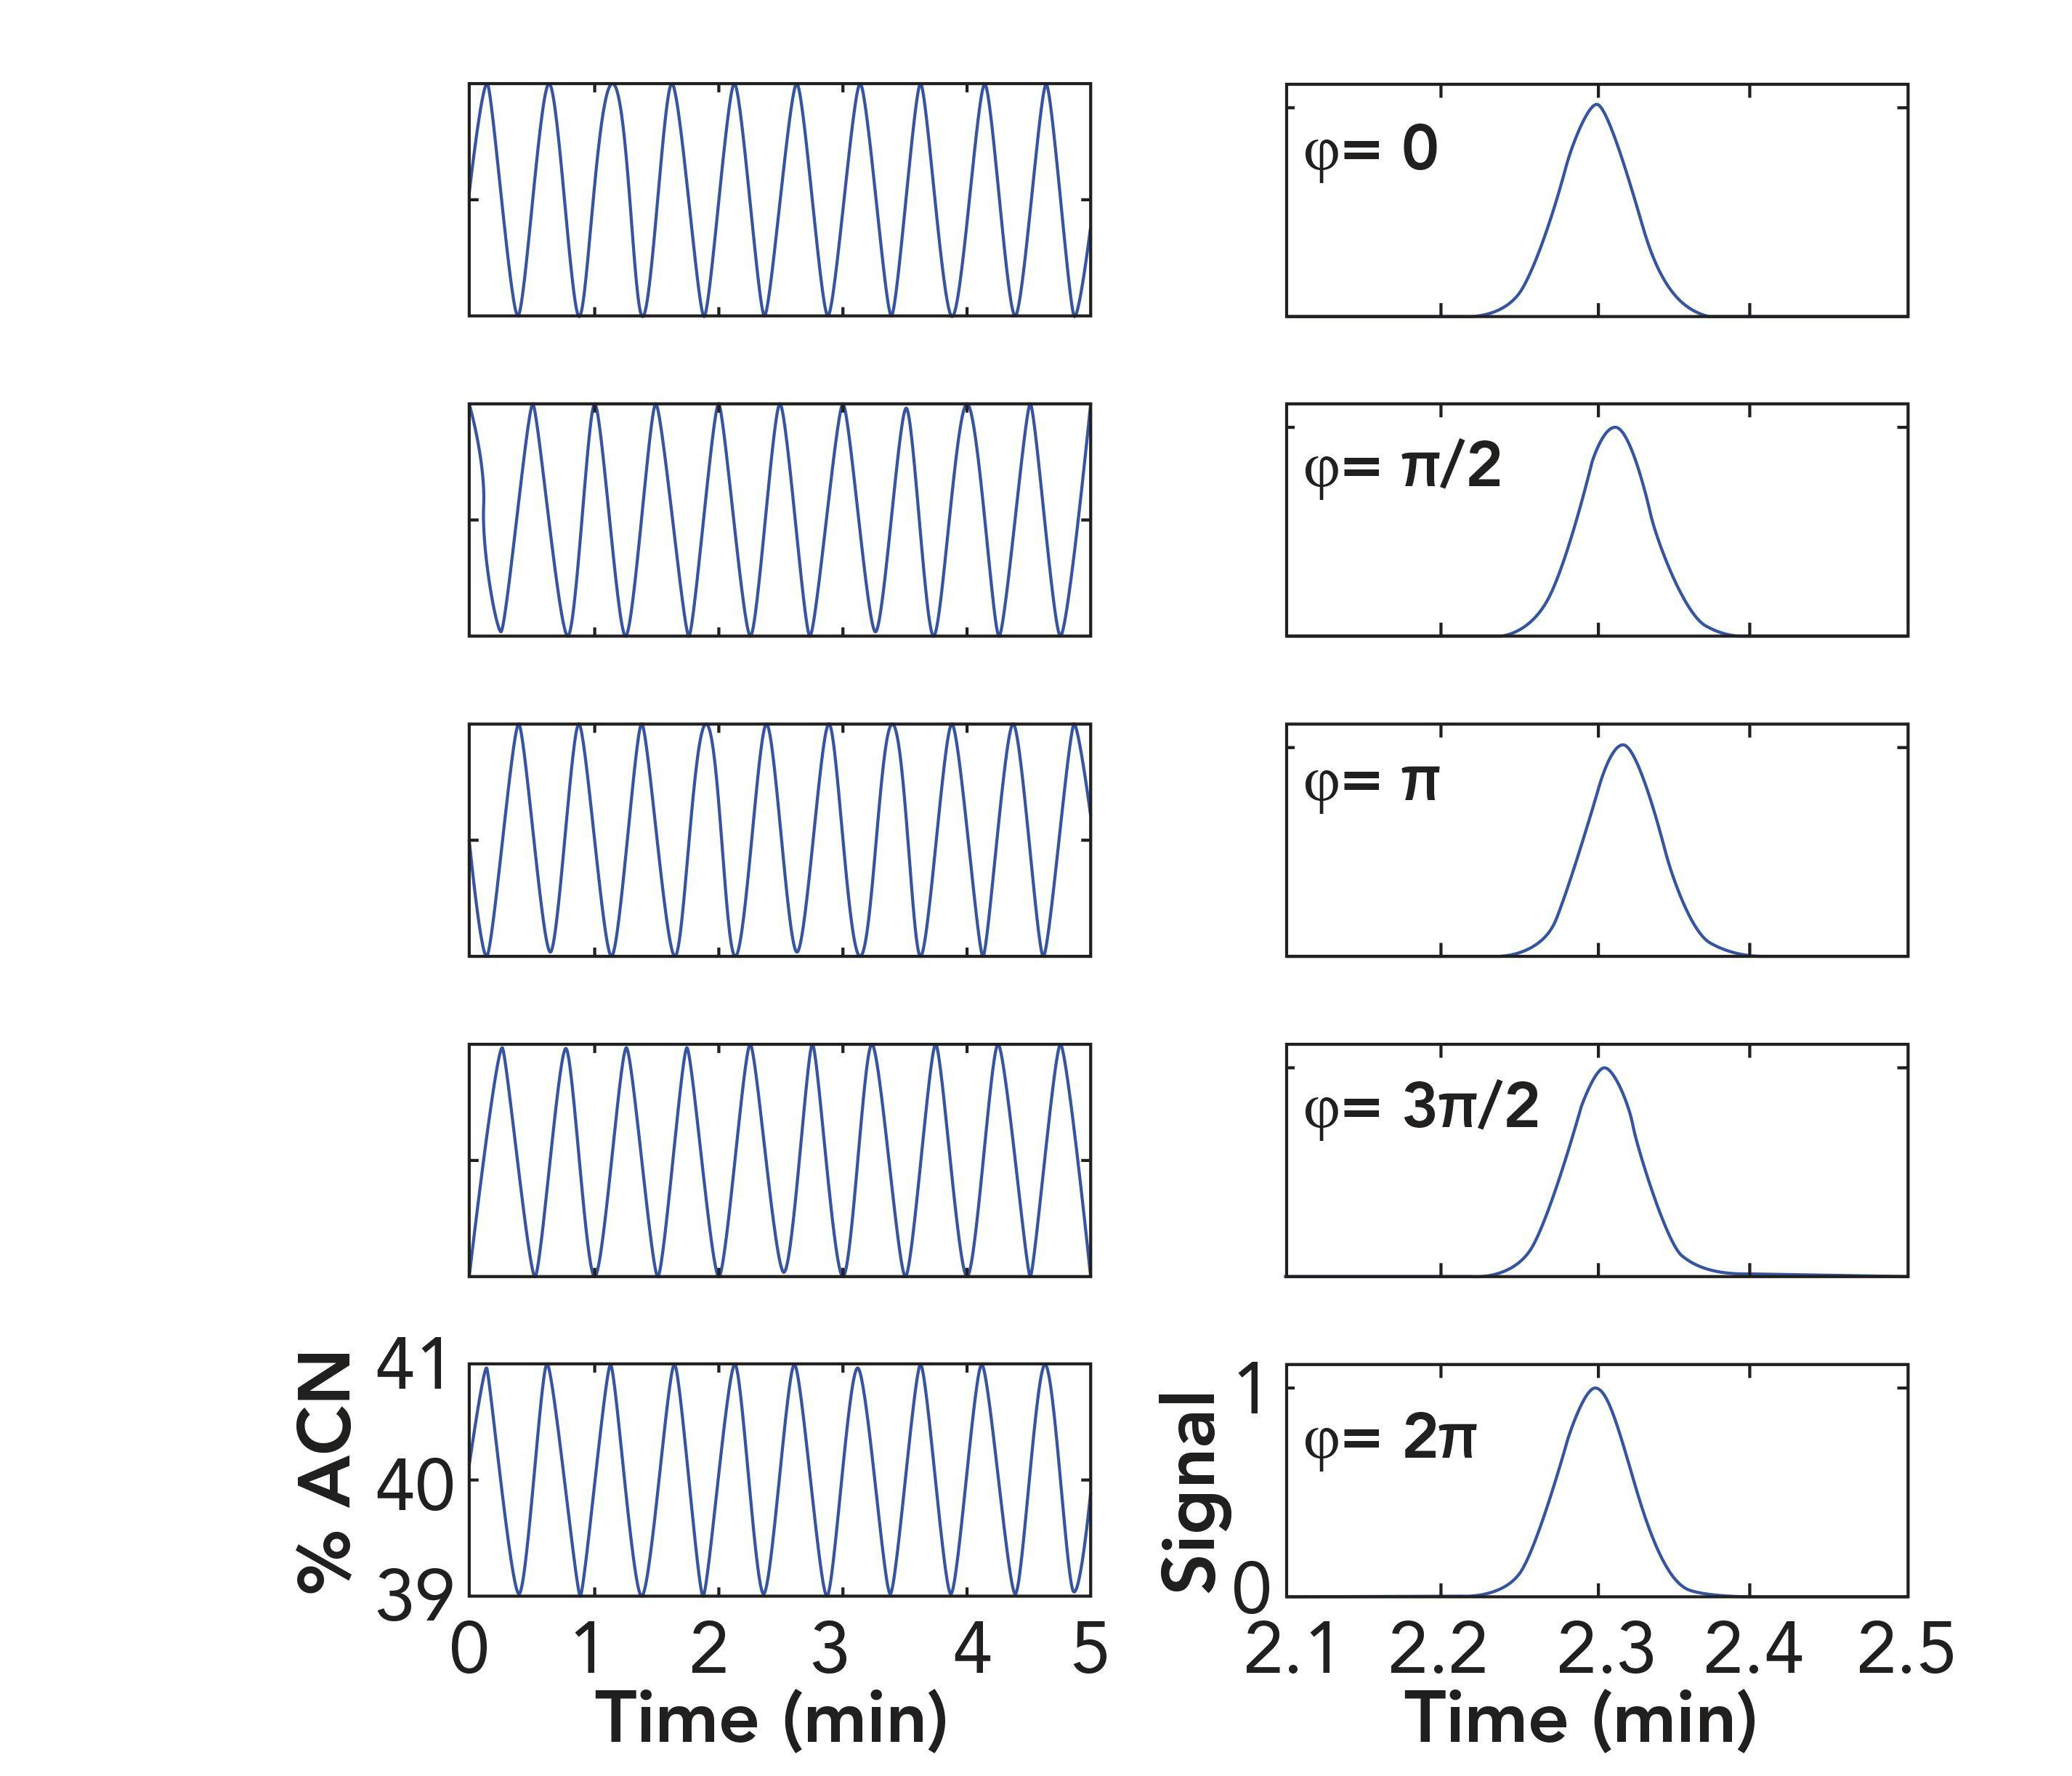 FIGURE 1: Effect of mobile-phase composition waves on retention variation under isocratic conditions. Left panels show composition waves that are phase shifted relative to the point of sample injection. Right panels show the corresponding chromatograms that result in each case. Composition waves and chromatograms are simulated using the following conditions: Analyte, acetophenone (LSST parameters are 6.3 and 45 for S and kw, respectively; these were obtained using a C18 column at 40 °C); Column dead volume, 100 μL; Flow rate, 0.2 mL/min.; Pump stroke volume, 100 μL; Composition wave amplitude, 1% acetonitrile. Axis labels for each column of subfigures are given in the bottom subfigure.